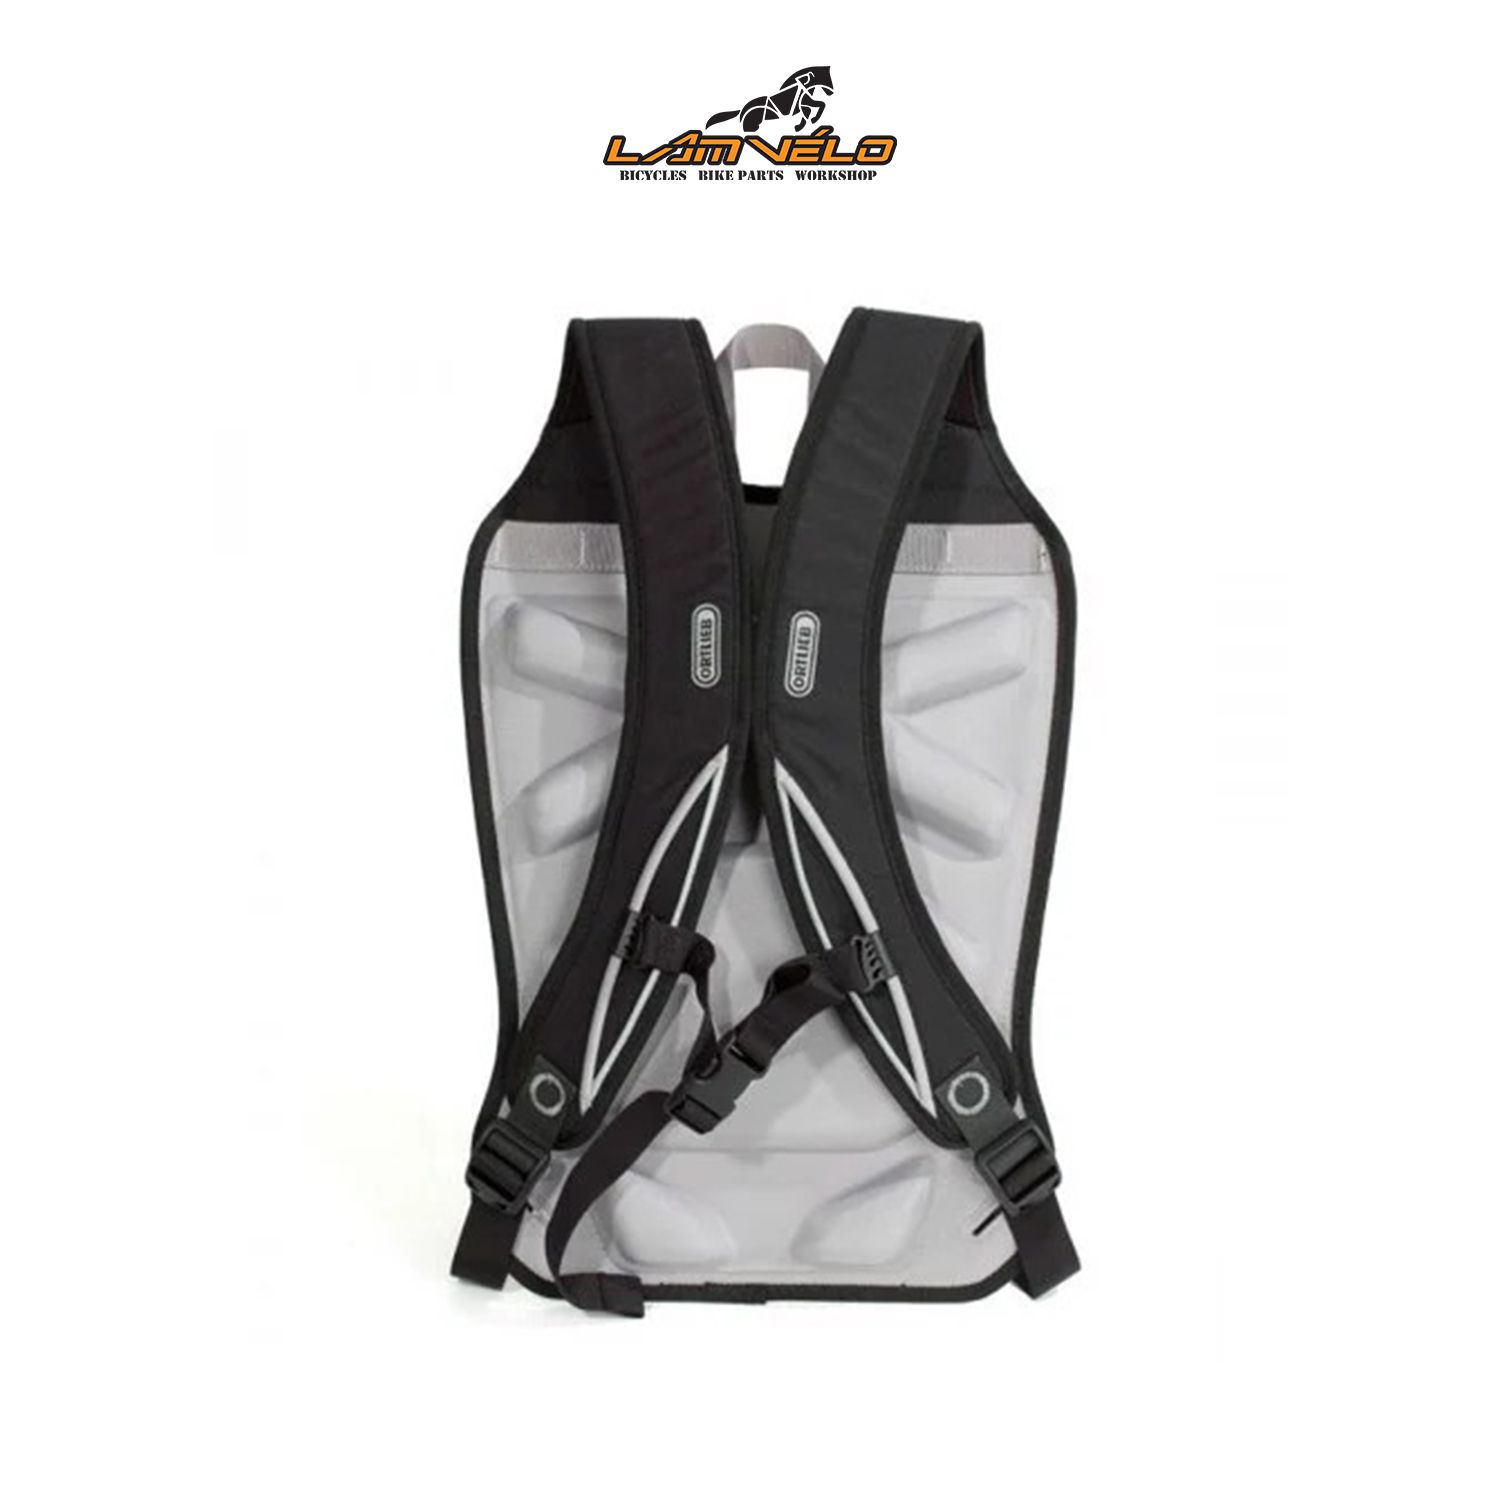  Carrying System Bike Pannier F34 